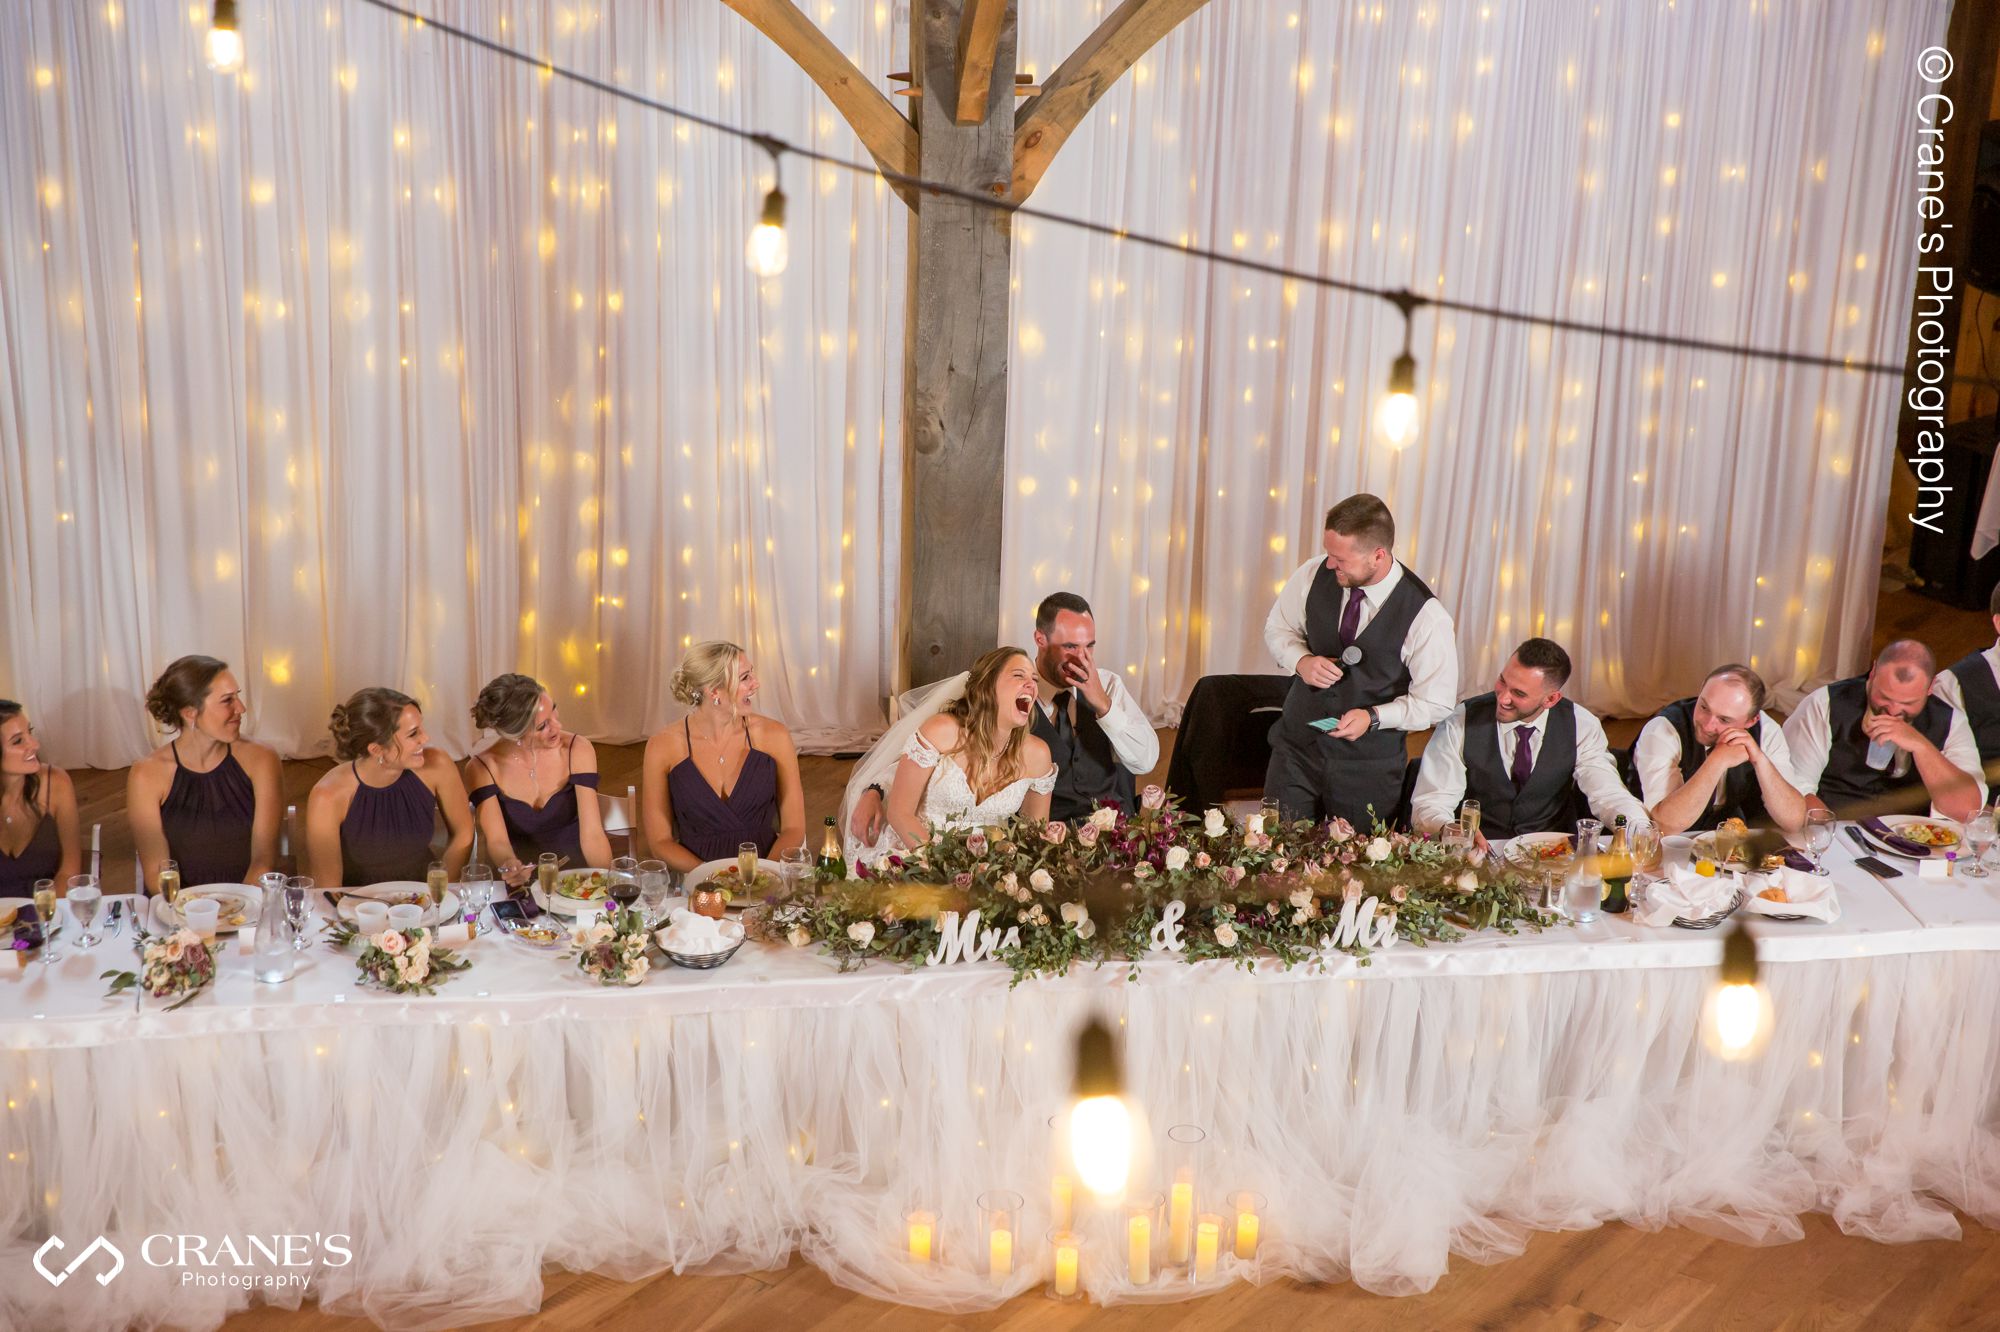 A large wedding party reception at The Swan Barn Door